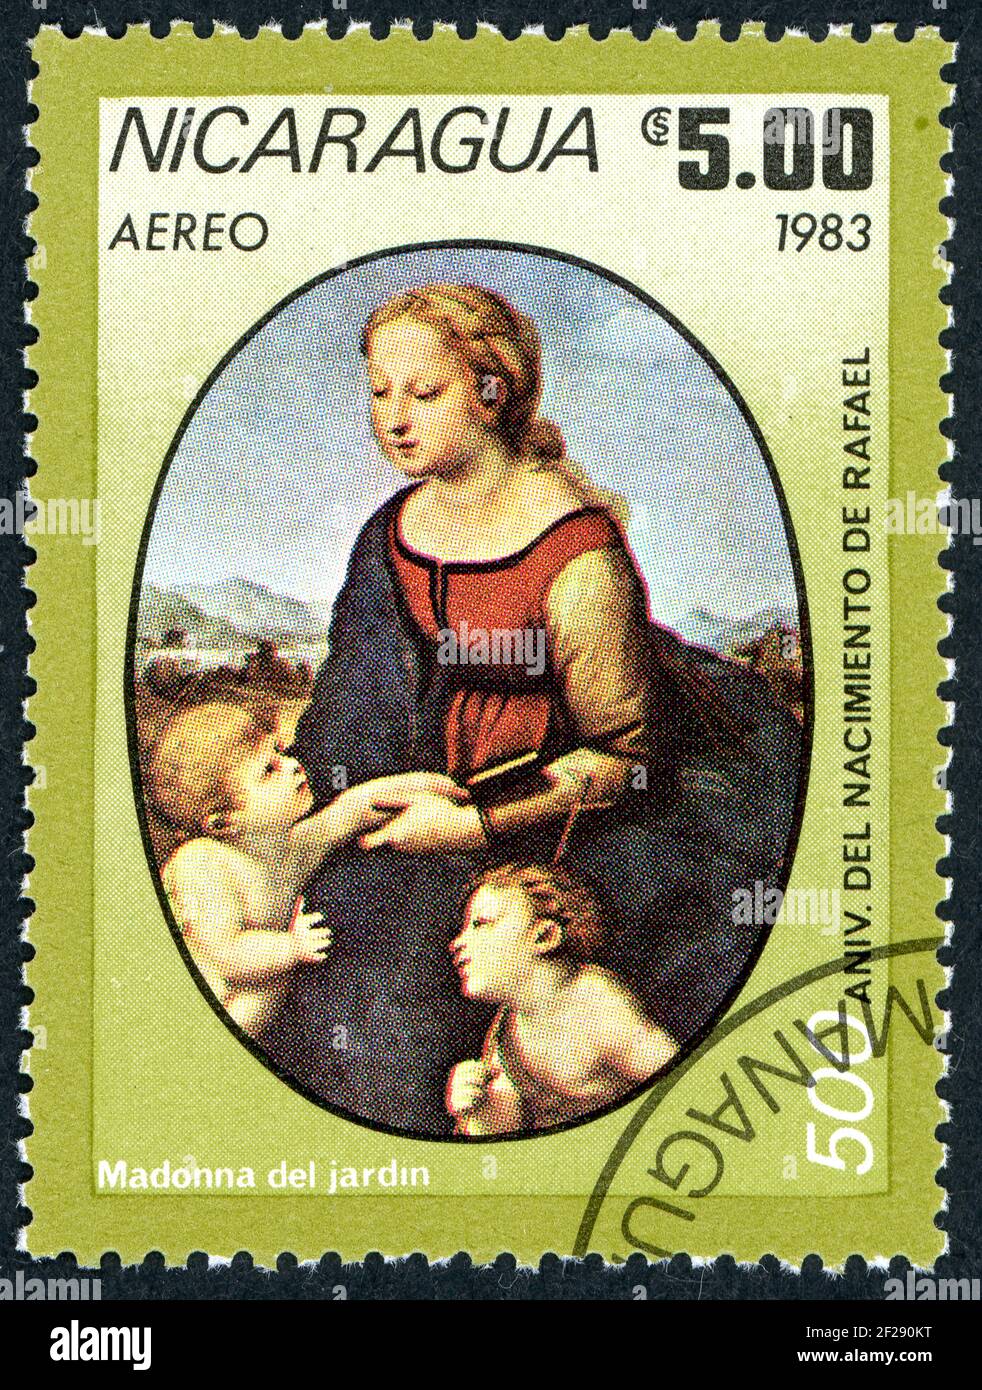 NICARAGUA - CIRCA 1983: A stamp printed in Nicaragua, shown the painting by Raphael - La Belle Jardiniere, circa 1983 Stock Photo